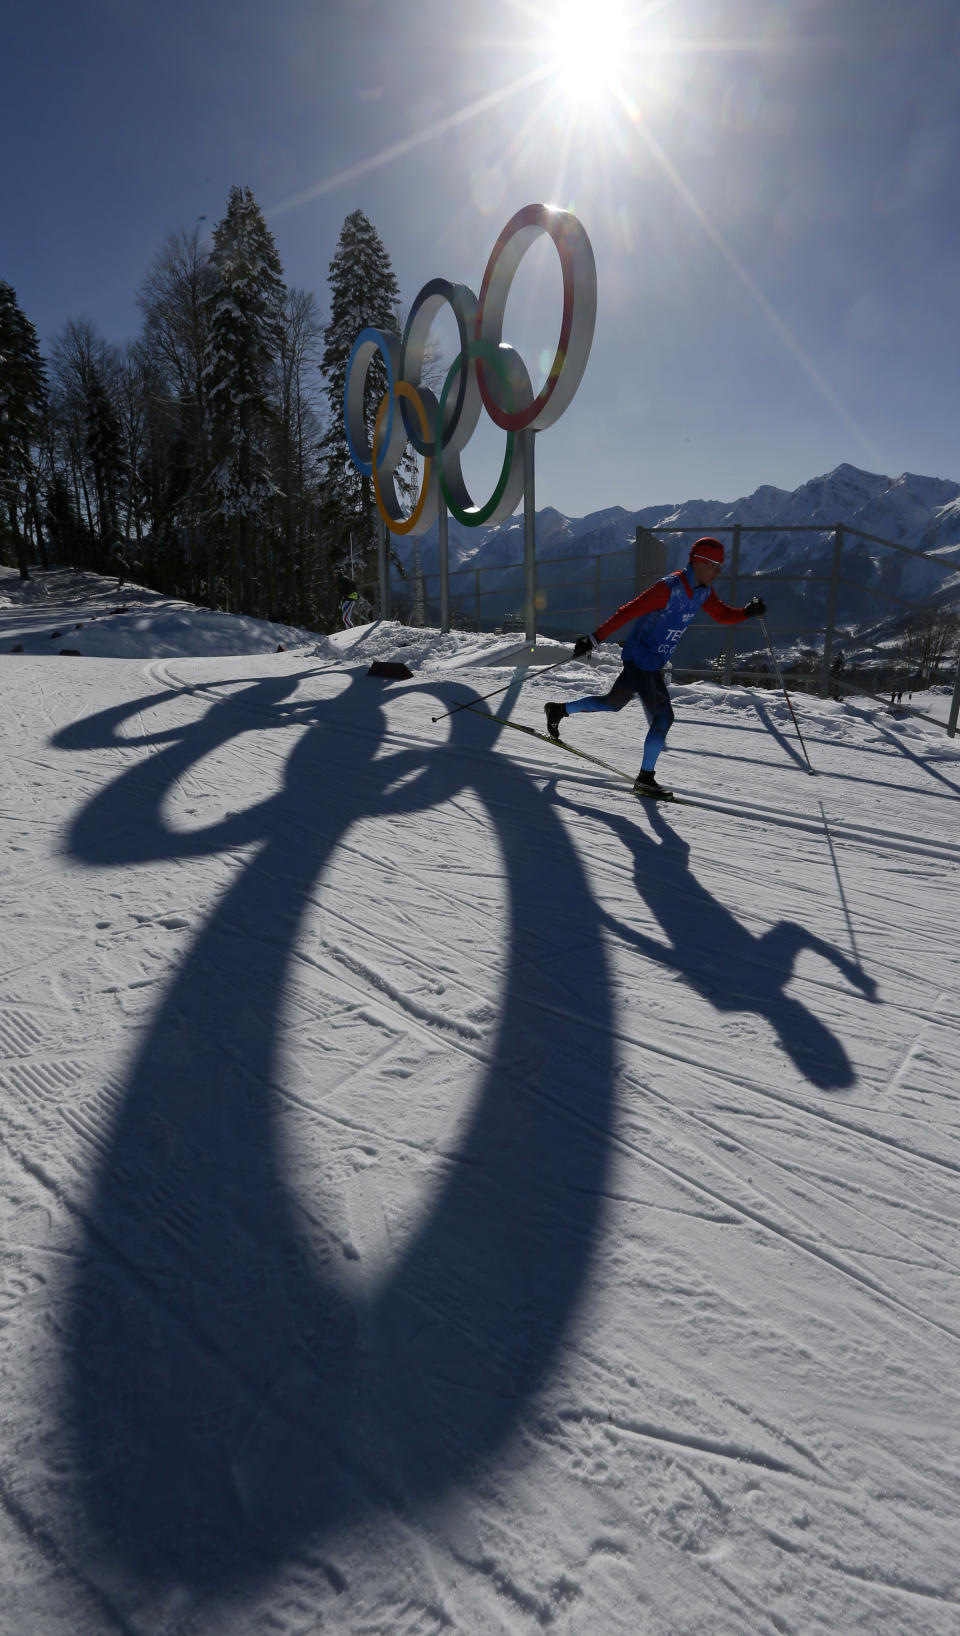 An unidentified Cross Country skier passes by the Olympic rings in the Cross Country stadium of the 2014 Winter Olympics, Tuesday, Feb. 4, 2014, in Krasnaya Polyana, Russia. (AP Photo/Dmitry Lovetsky)